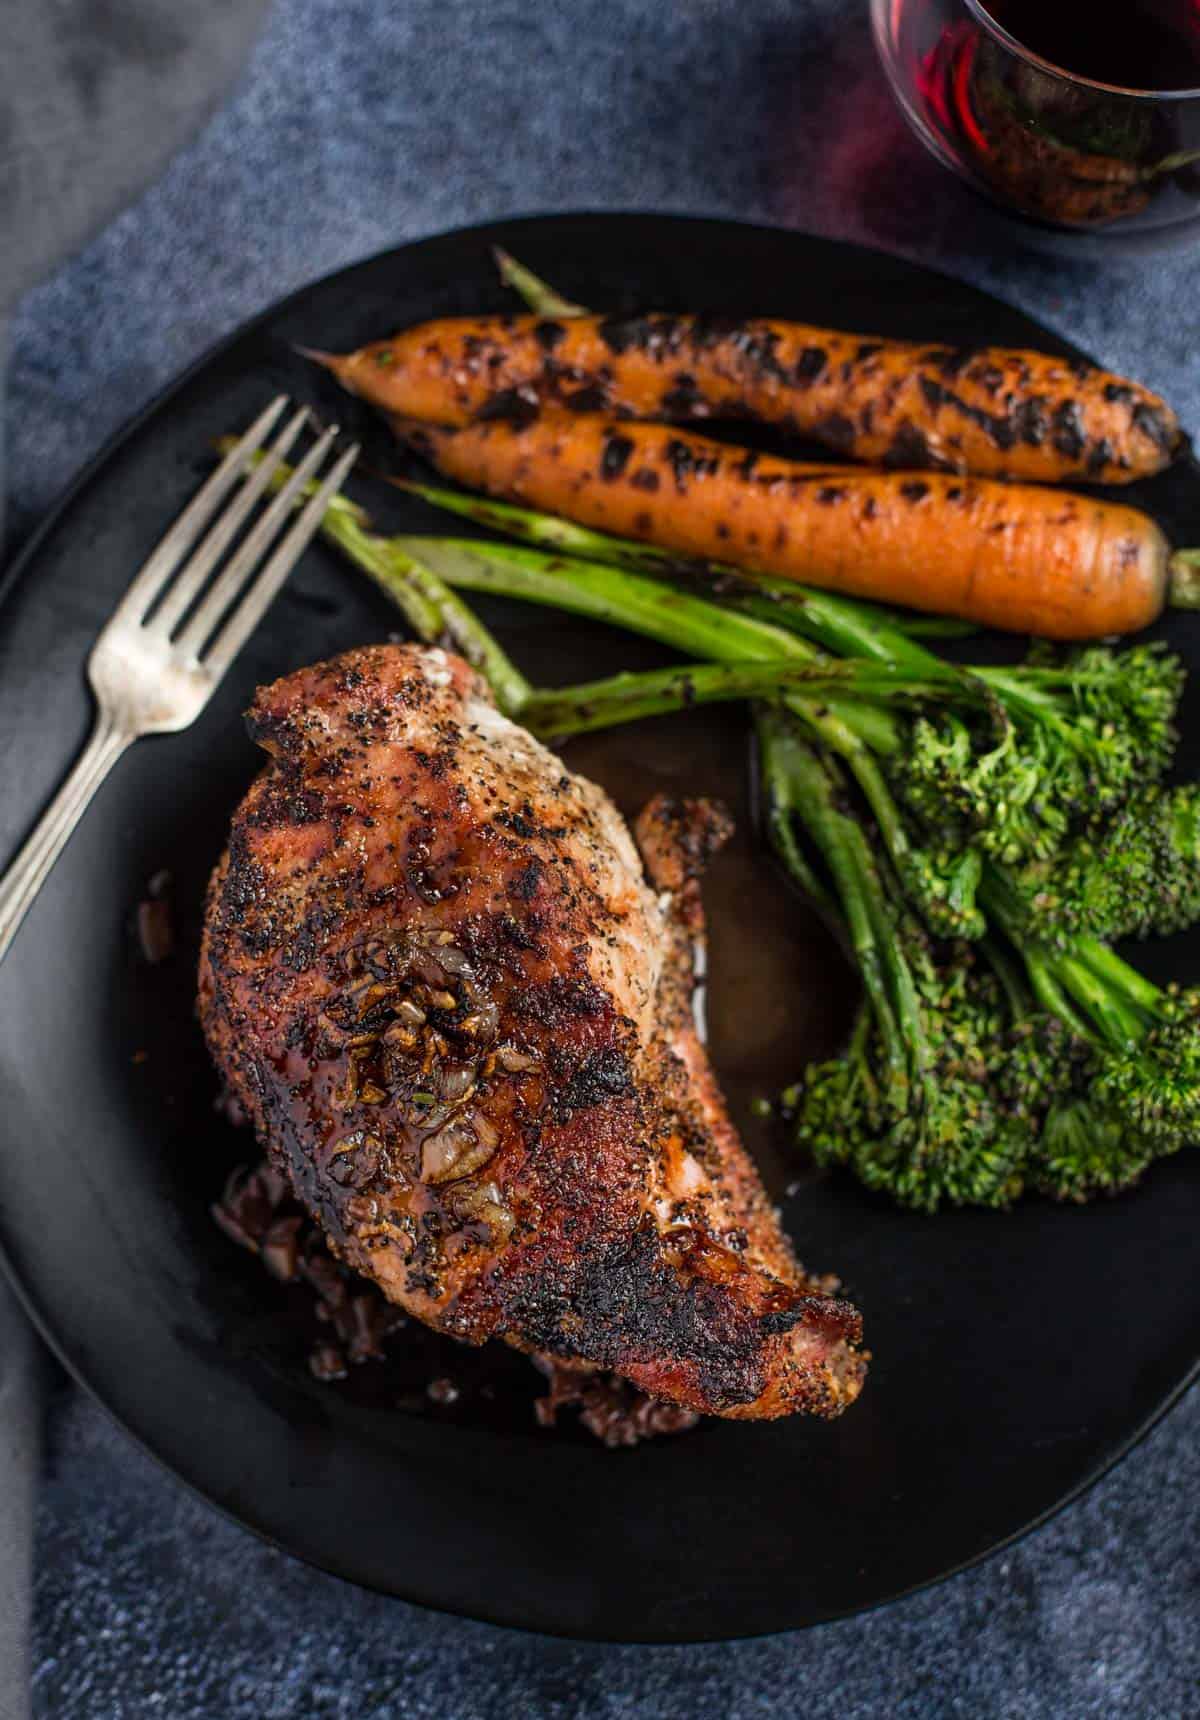 A Grilled Pork Chop drizzled with a red wine pan sauce on a black plate with vegetables on the side